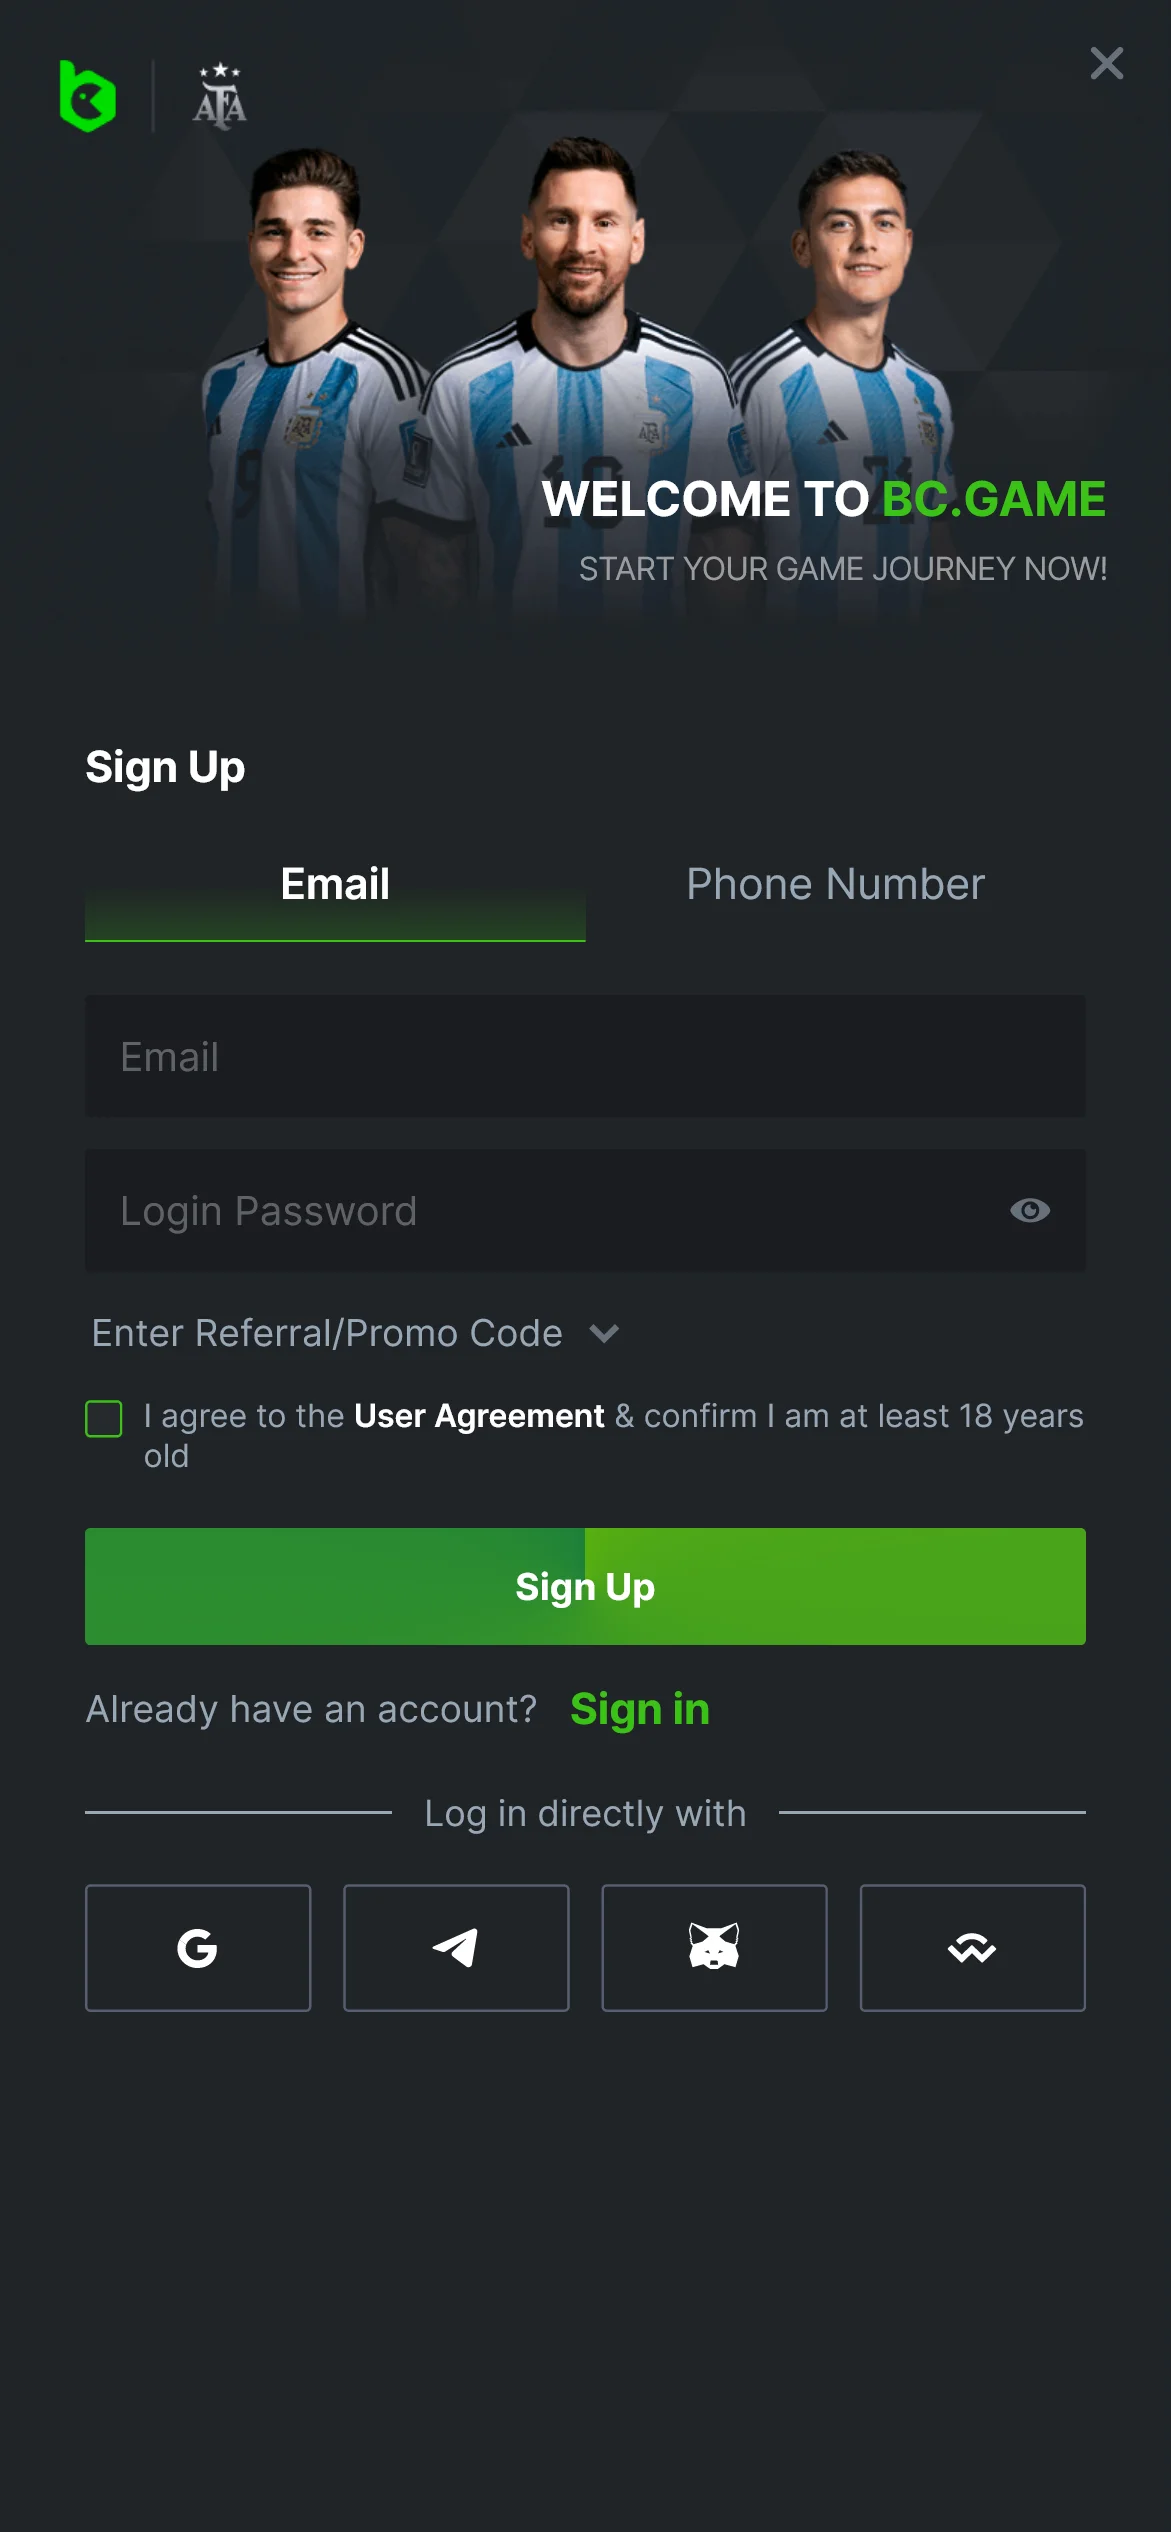 How to register through the BC.game application